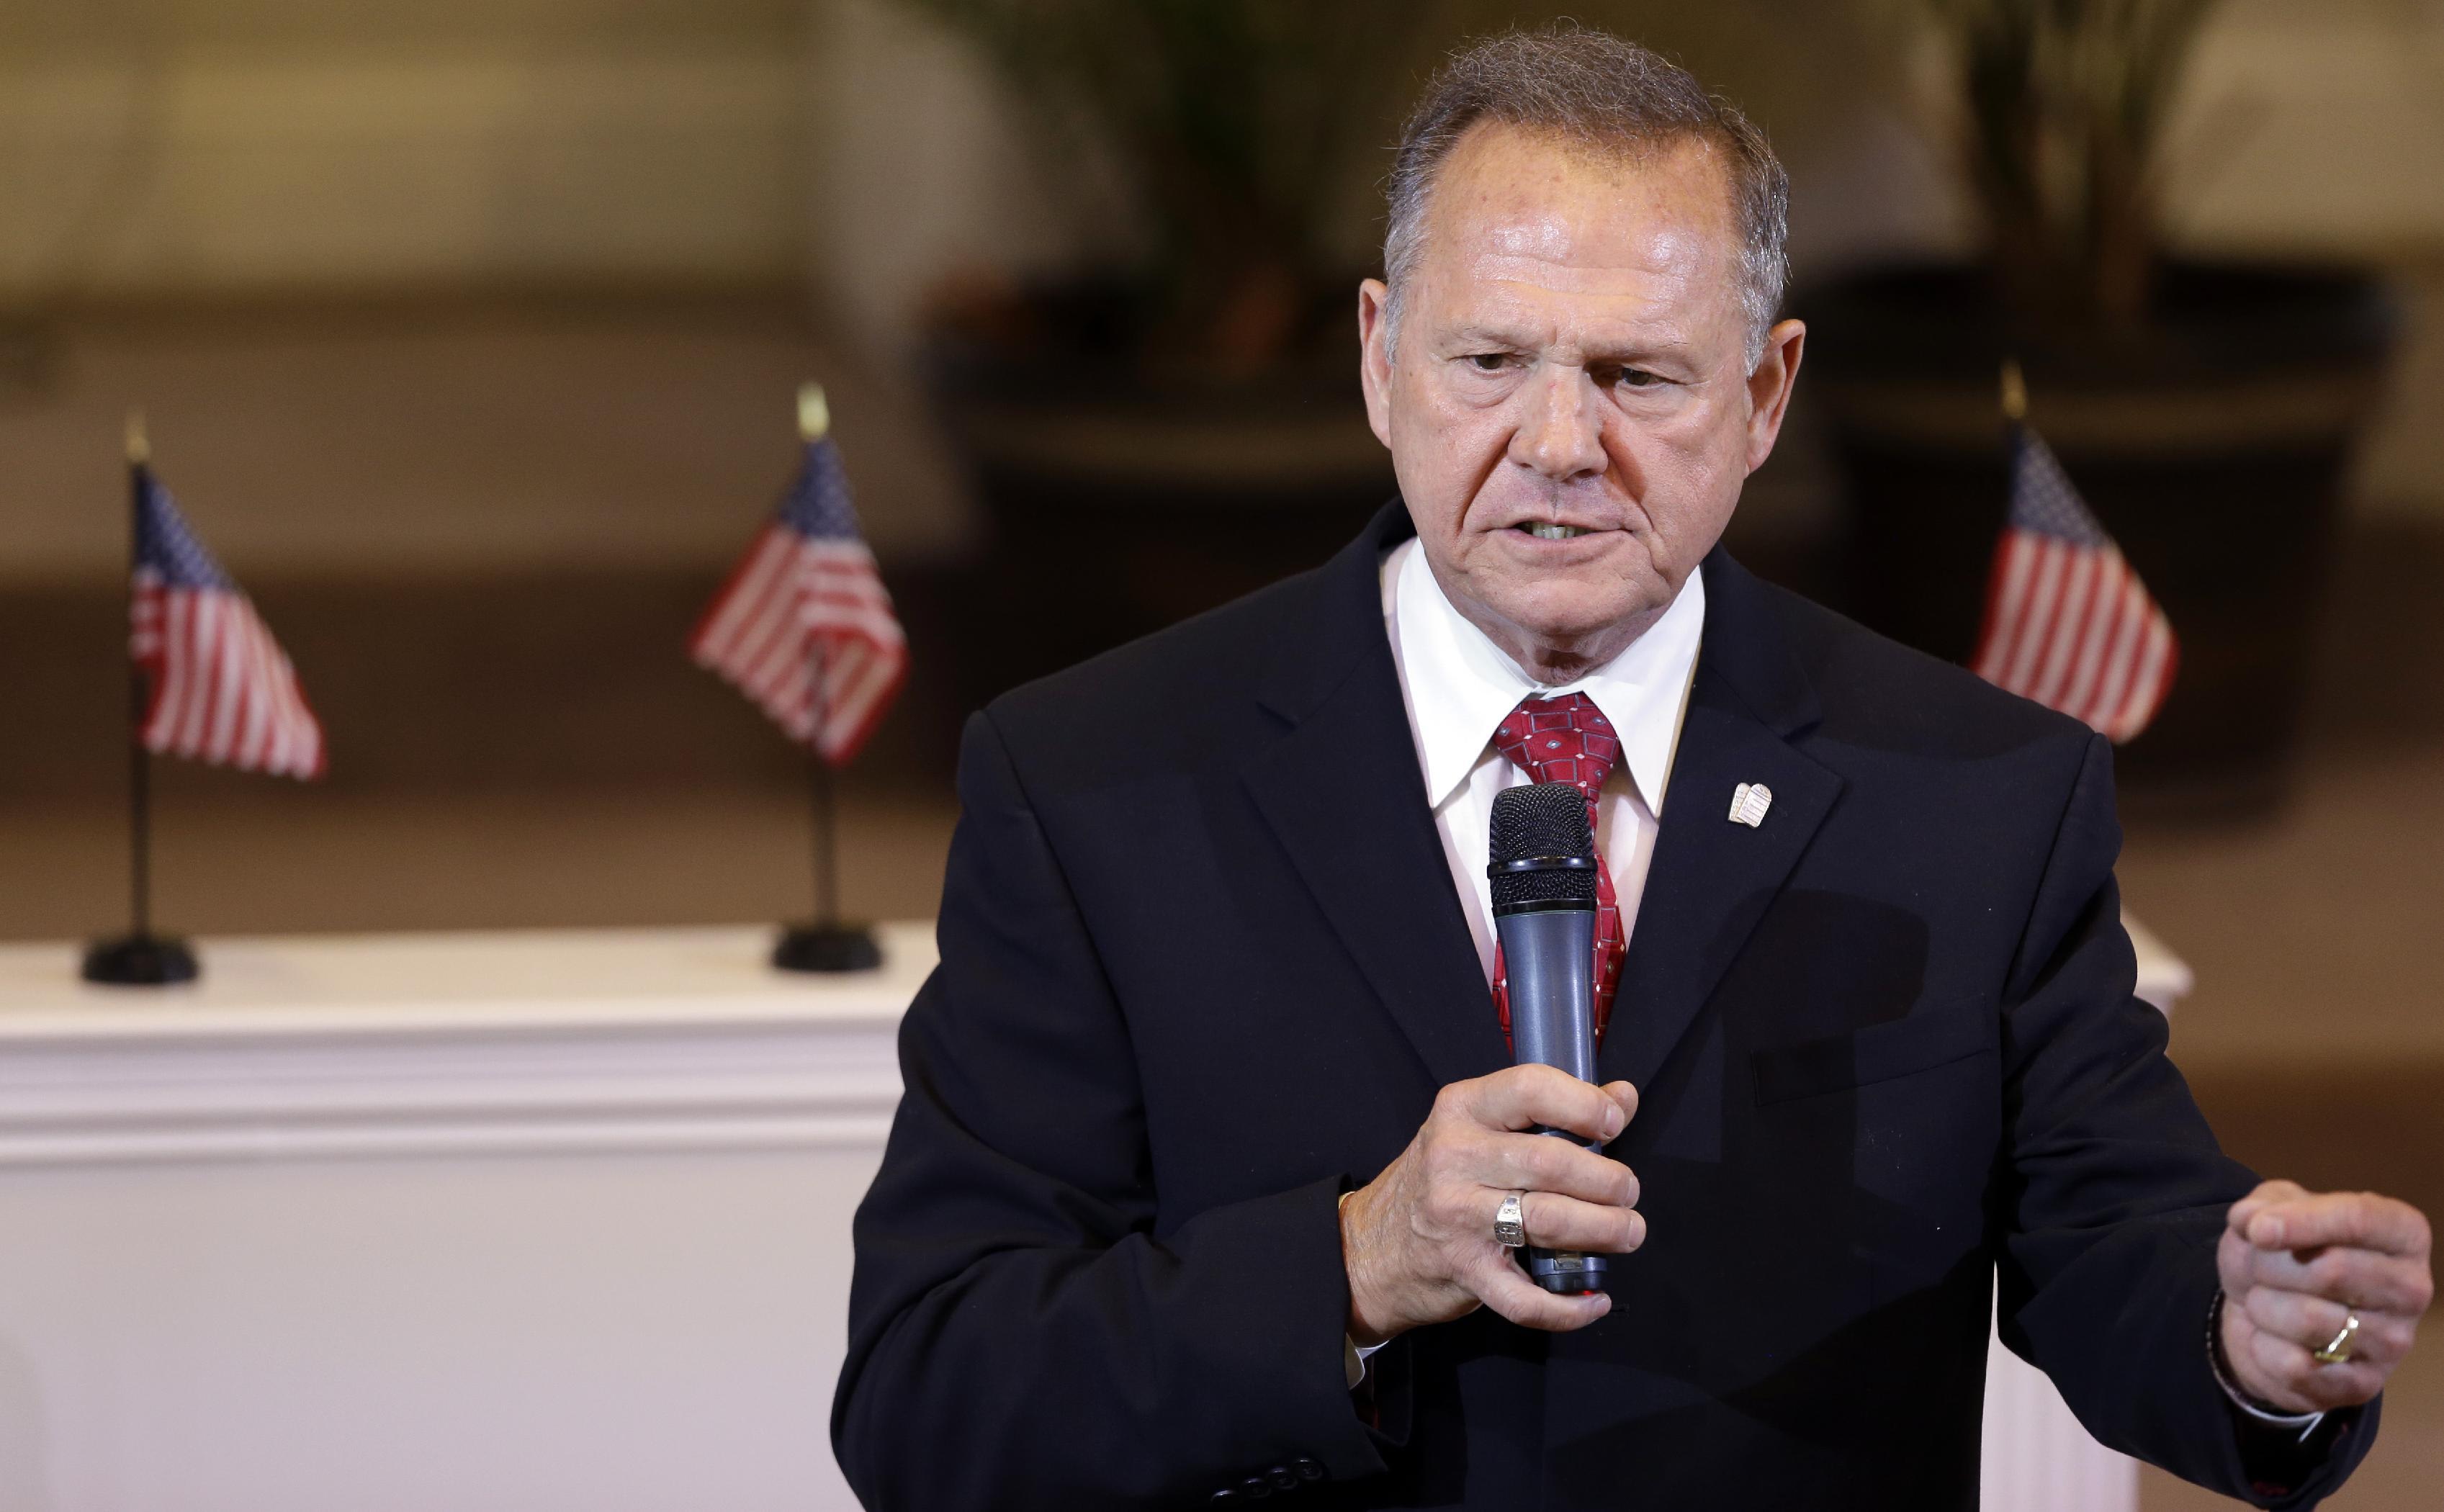 Alabama Supreme Court Chief Justice Roy Moore speaks to the congregation of Kimberly Church of God, Sunday, June 28, 2015, in Kimberley, Ala. (AP Photo/Butch Dill)